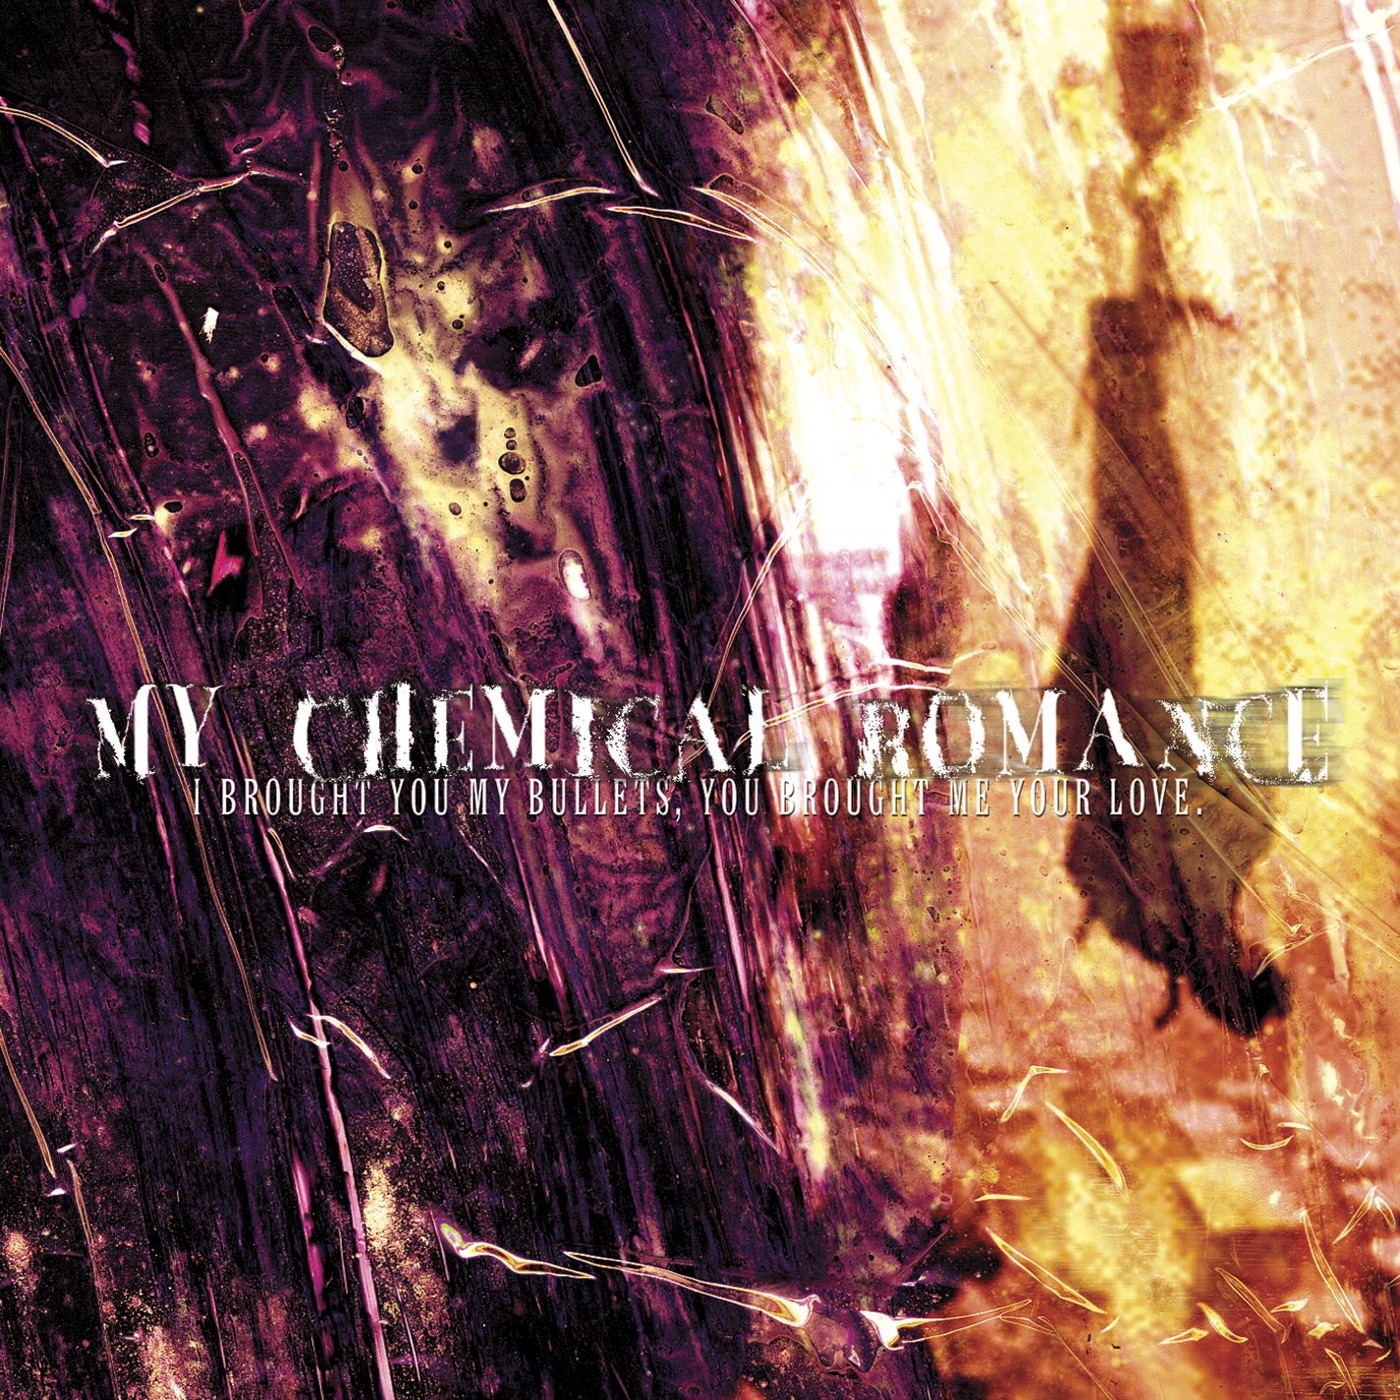 I Brought You My Bullets, You Brought Me Your Love by My Chemical Romance